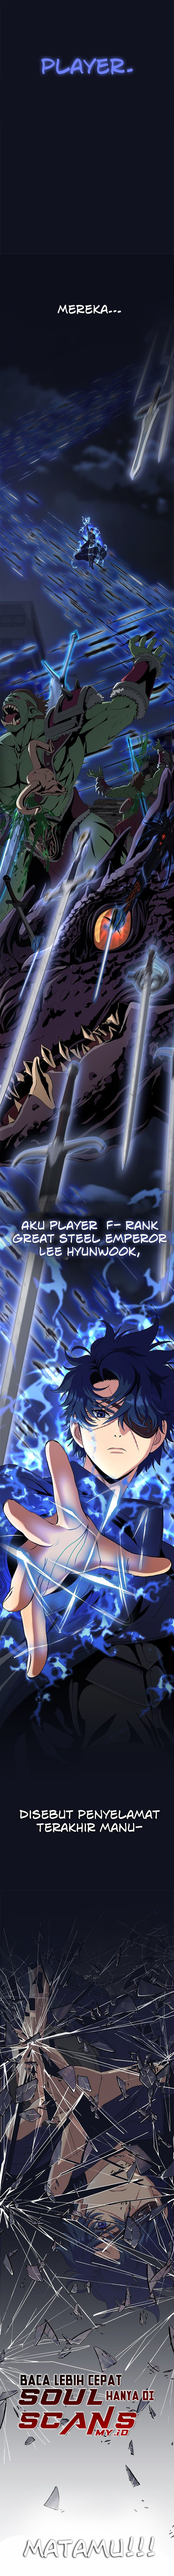 Steel-Eating Player Chapter 01 4